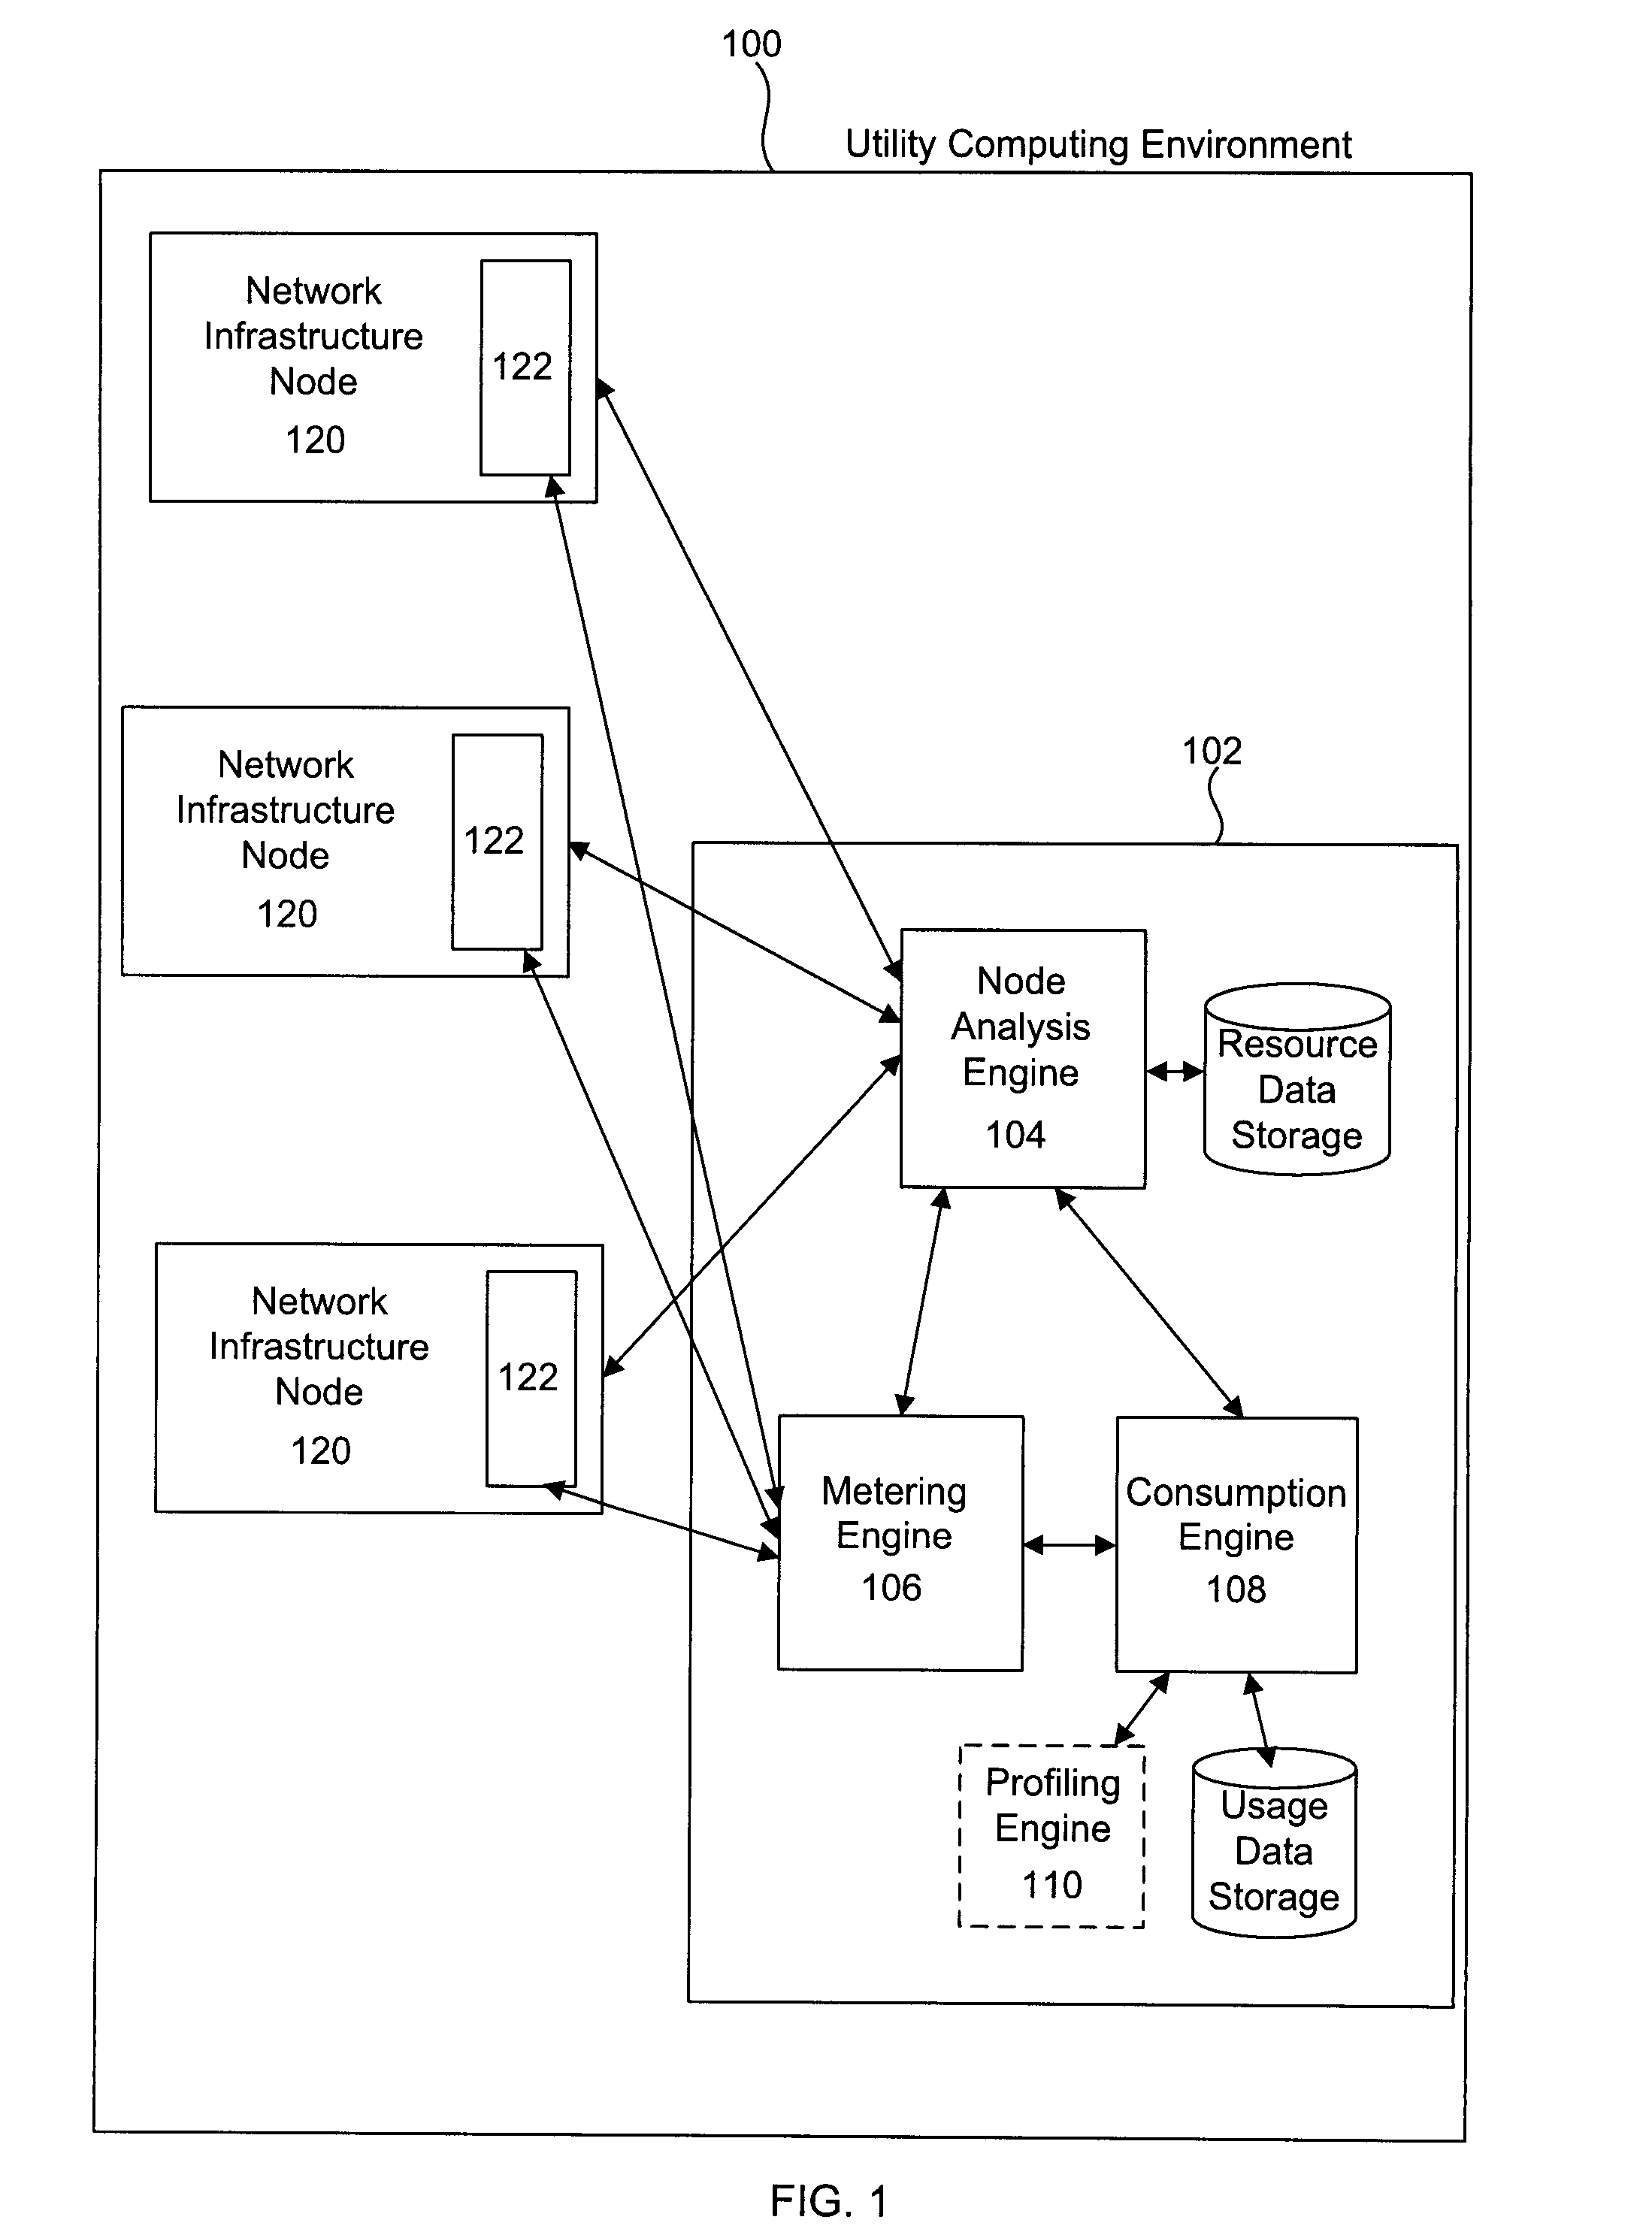 Method and System for Determining Computer Resource Usage in Utility Computing